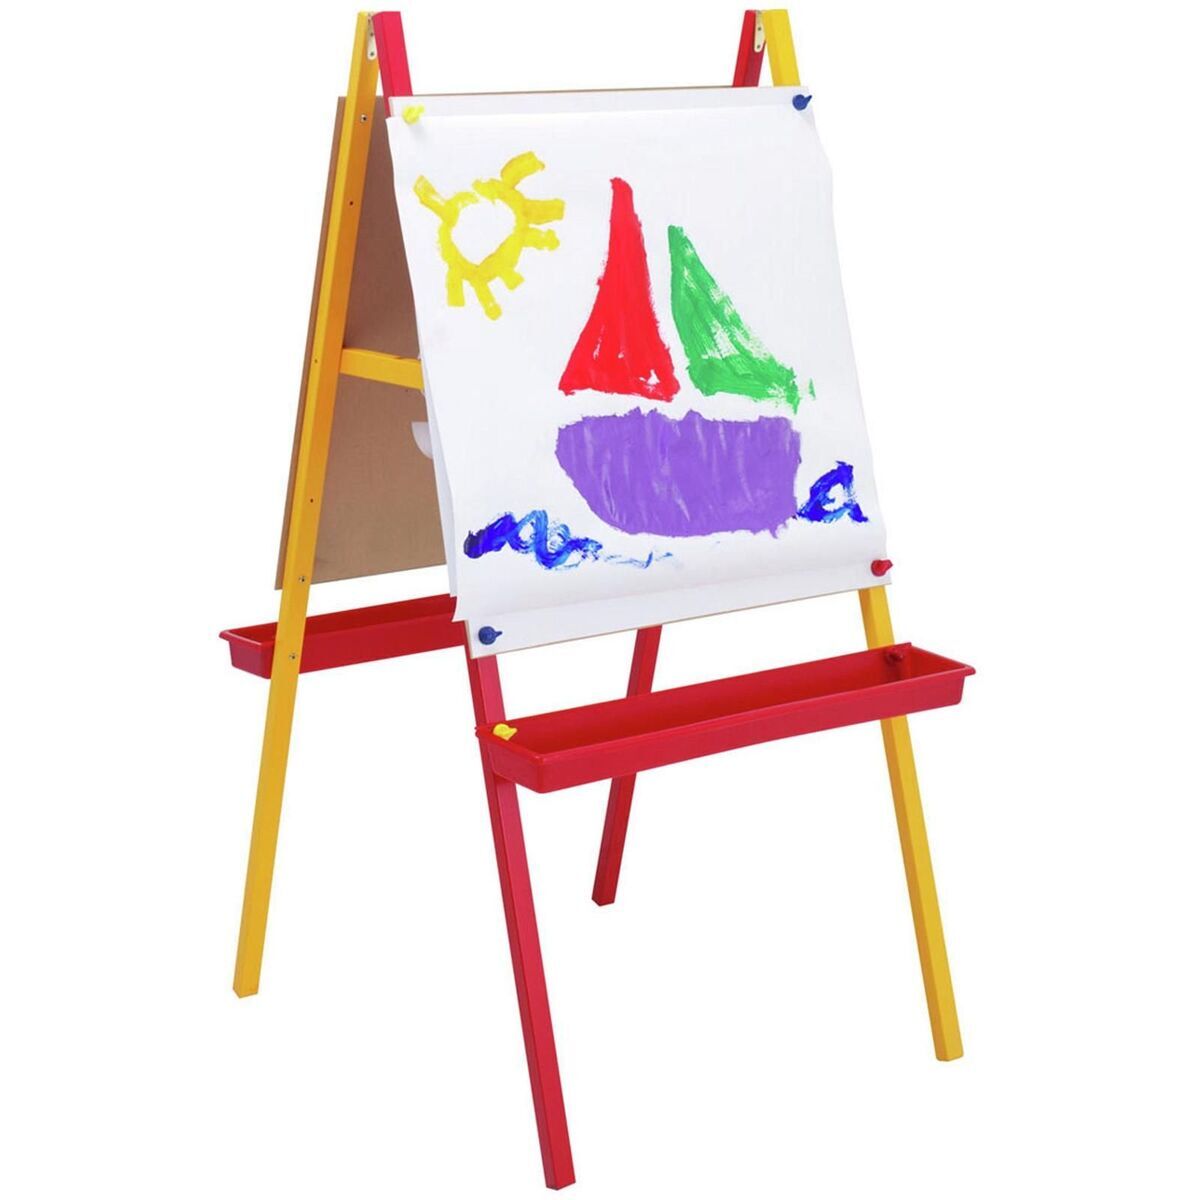 Wood Easels, Easel Stand for Painting, Art, and Crafts (9 x 14.8 in, 12 Pack)